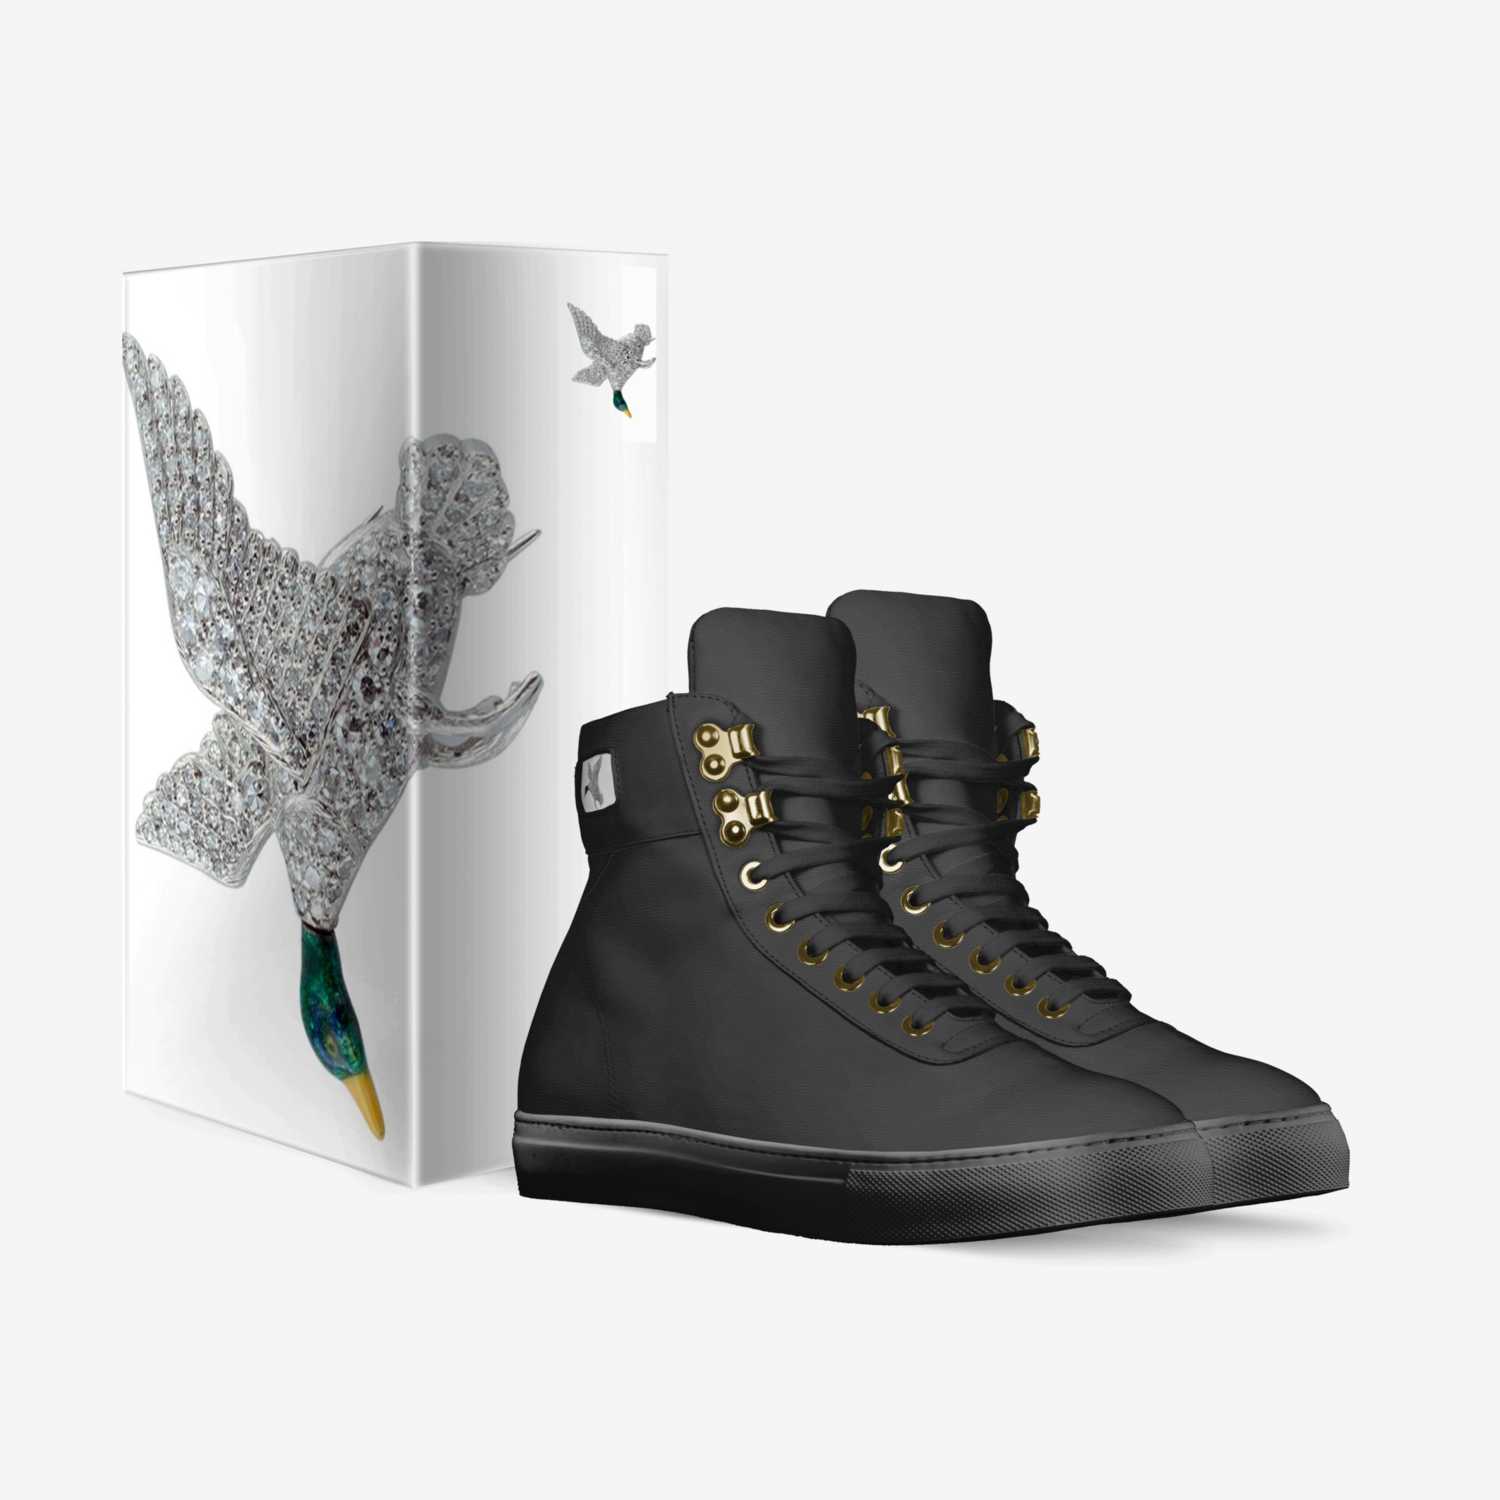 Design custom trendy shoe of any pod with ads by Lawalshaft